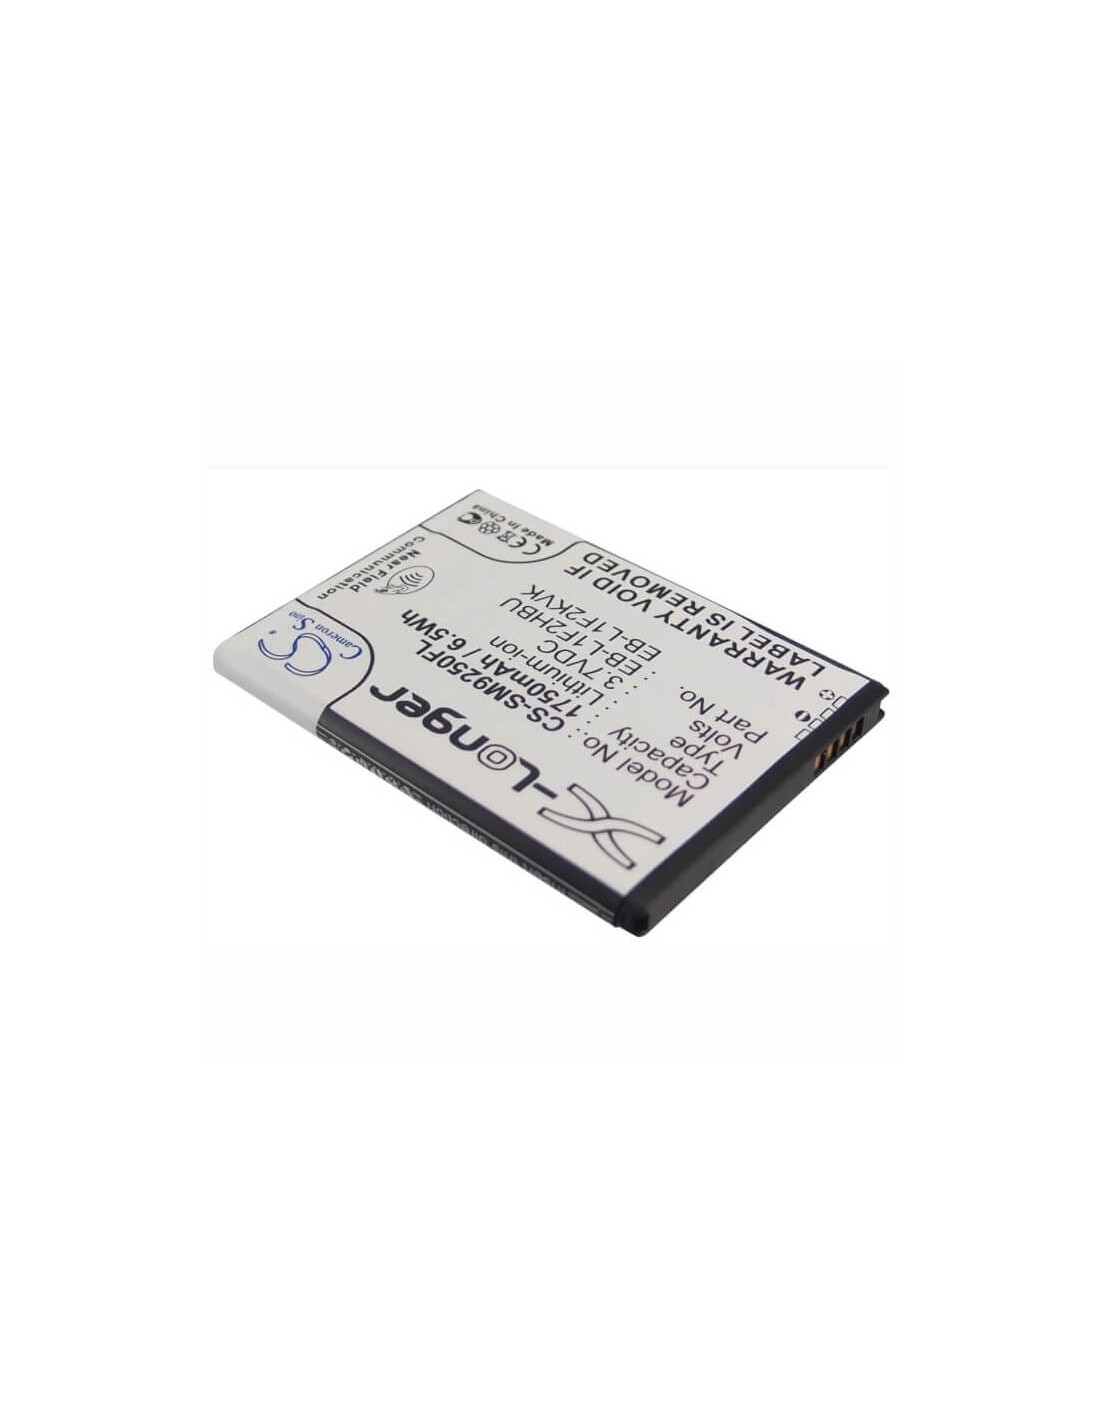 Battery for Samsung GT-i9250, Nexus Prime, Galaxy Nexus NFC support 3.7V, 1750mAh - 6.48Wh